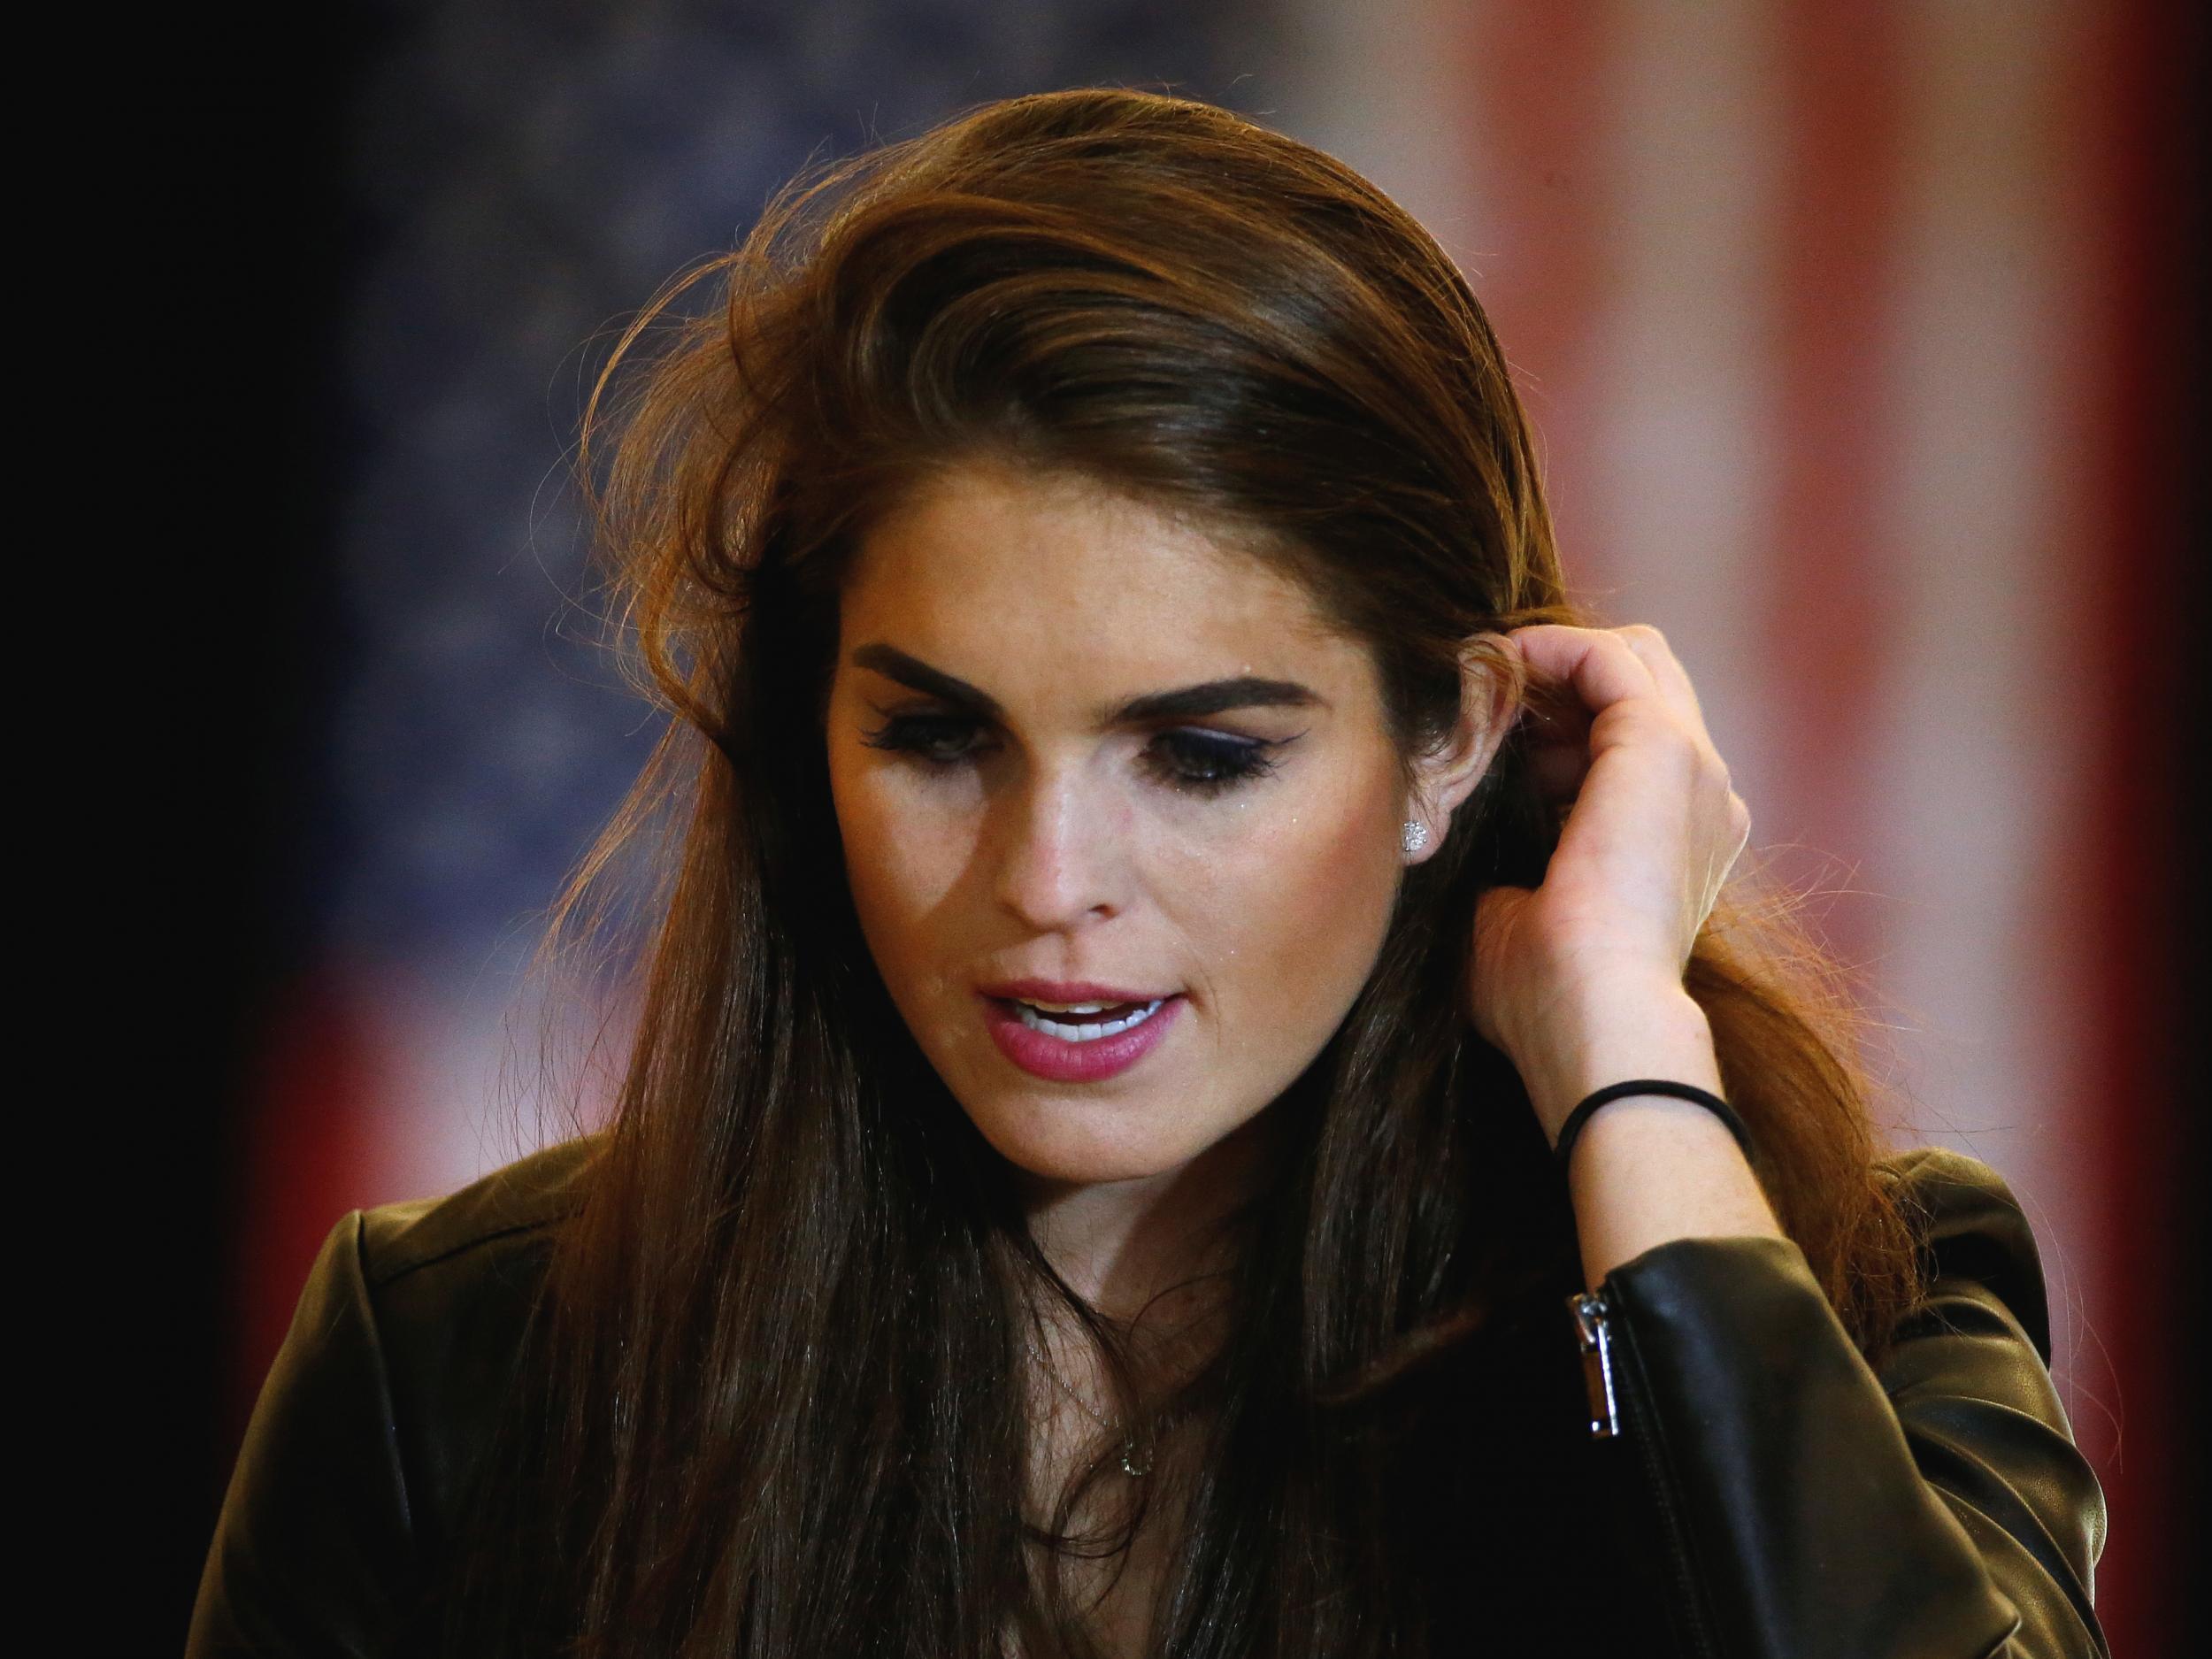 Hope Hicks was a former aide to Donald Trump during his presidential administration